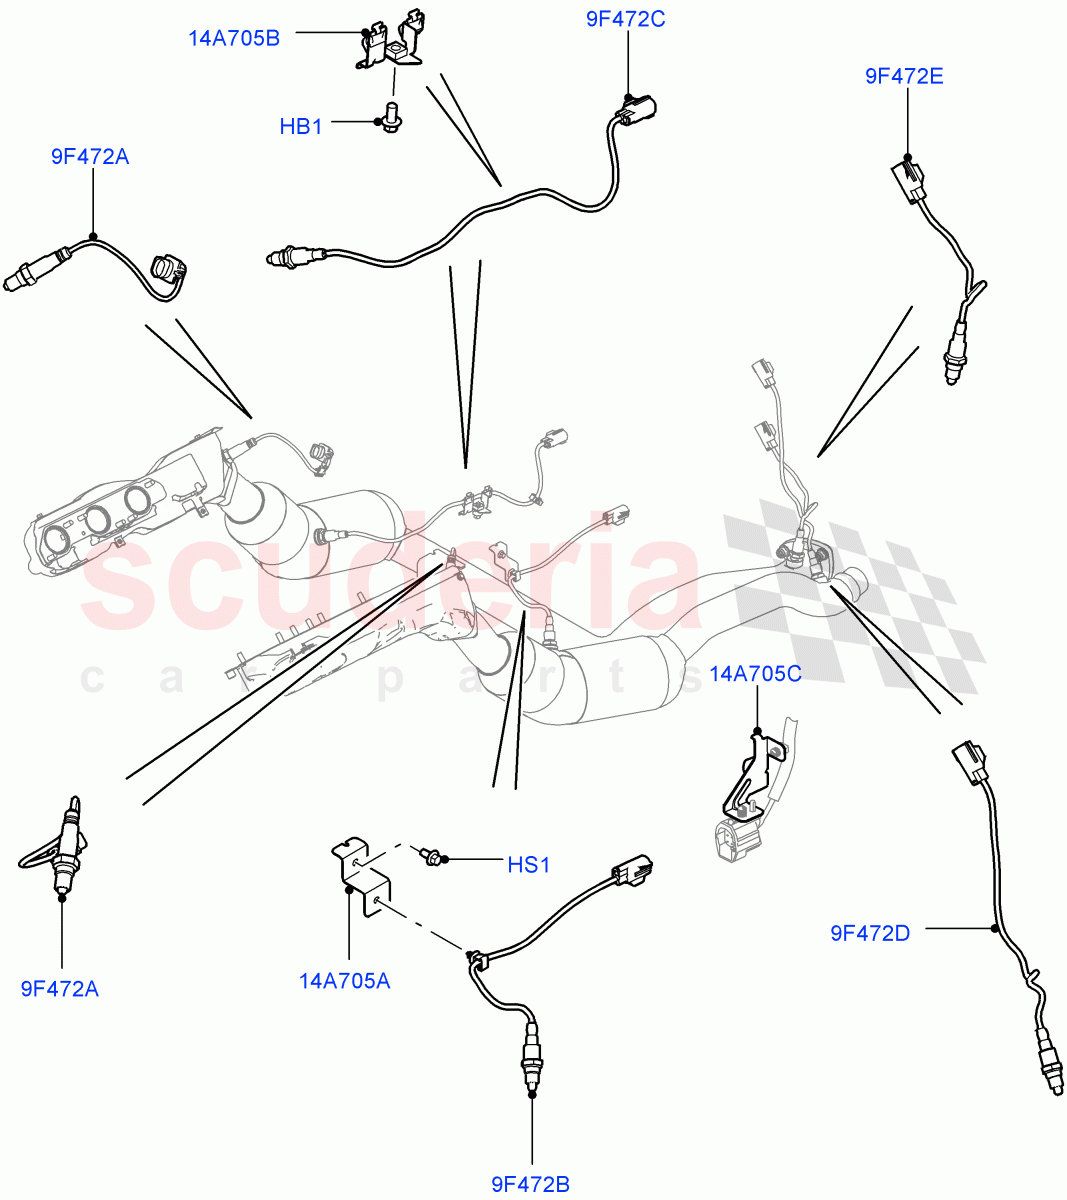 Exhaust System(Exhaust System Sensors)(3.0L DOHC GDI SC V6 PETROL)((V)FROMEA000001) of Land Rover Land Rover Discovery 4 (2010-2016) [3.0 DOHC GDI SC V6 Petrol]